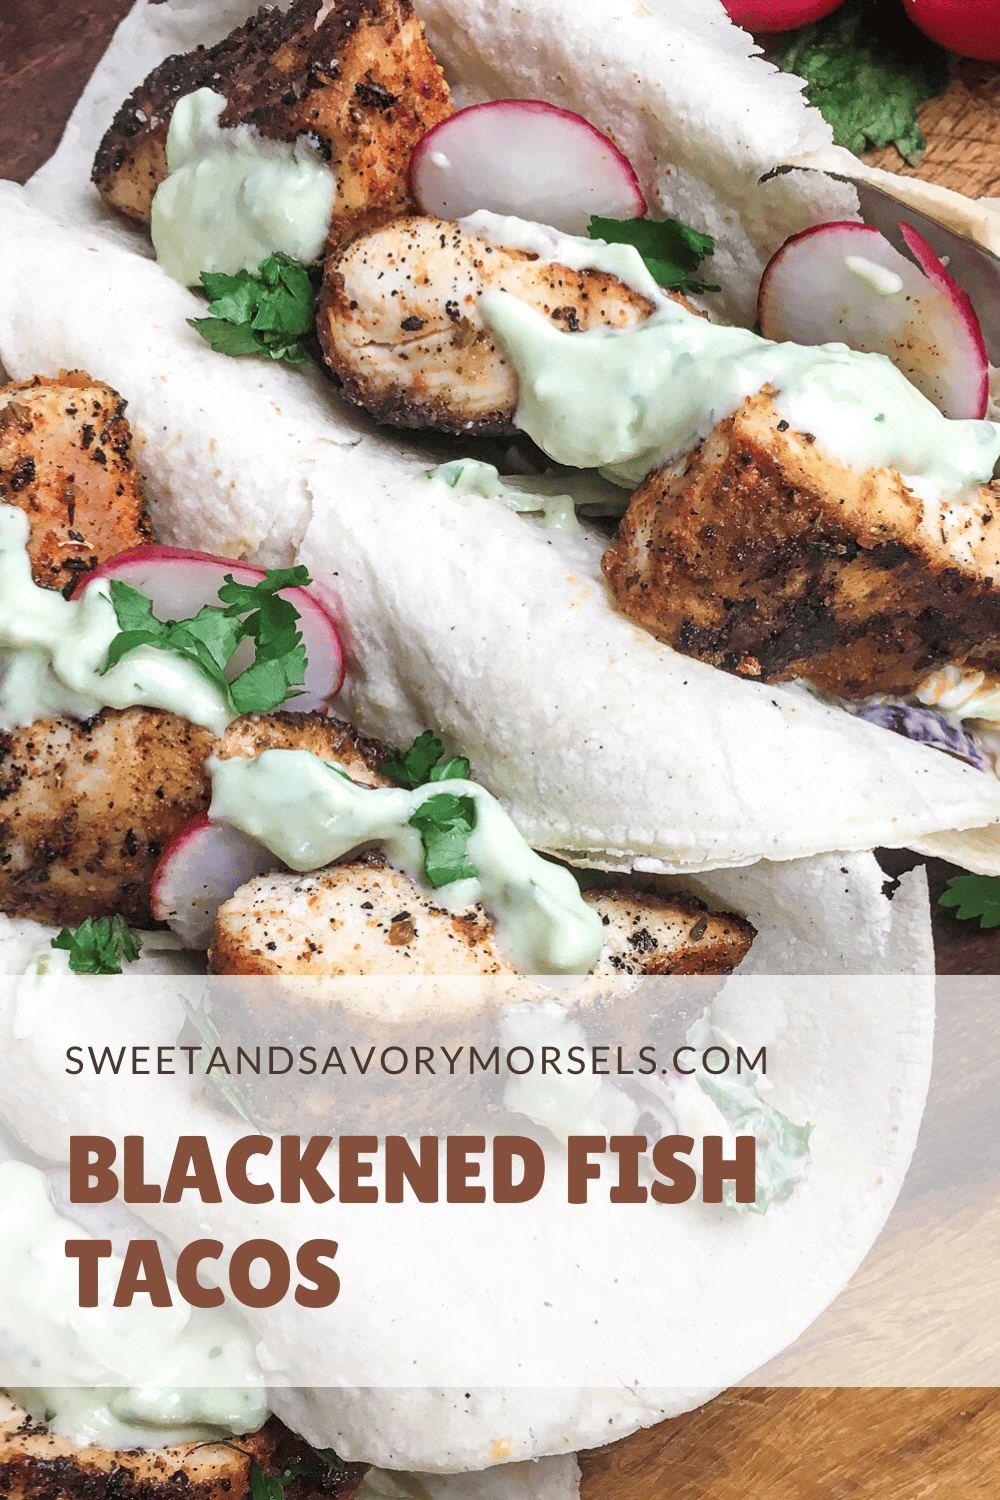 Mild-tasting mahi-mahi fillets coated in Cajun spice are laid atop of a bed of creamy coleslaw, topped with a cool avocado sauce, then rolled in warm tortillas in this amazing Blackened Fish Tacos recipe.